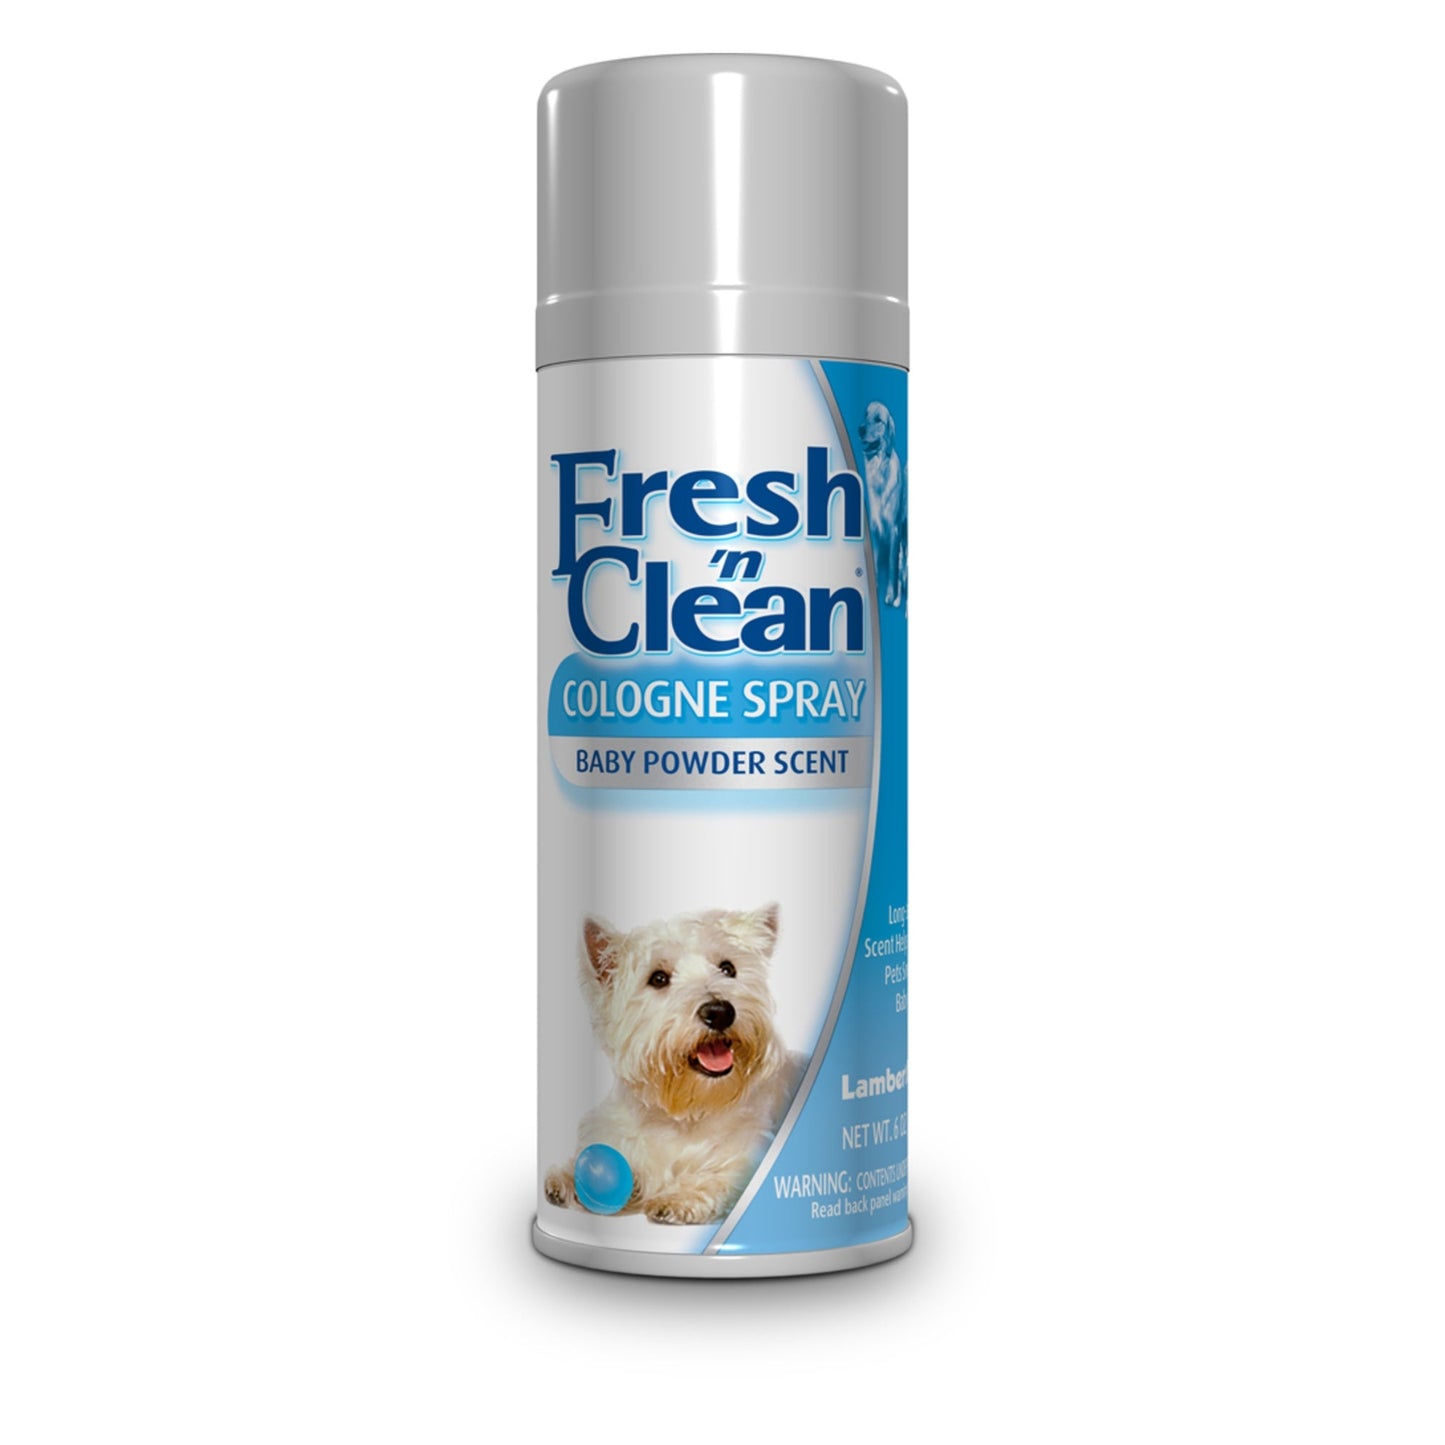 Fresh N Clean Baby Powder Scent Cologne Spray for Dogs 1ea/6 oz